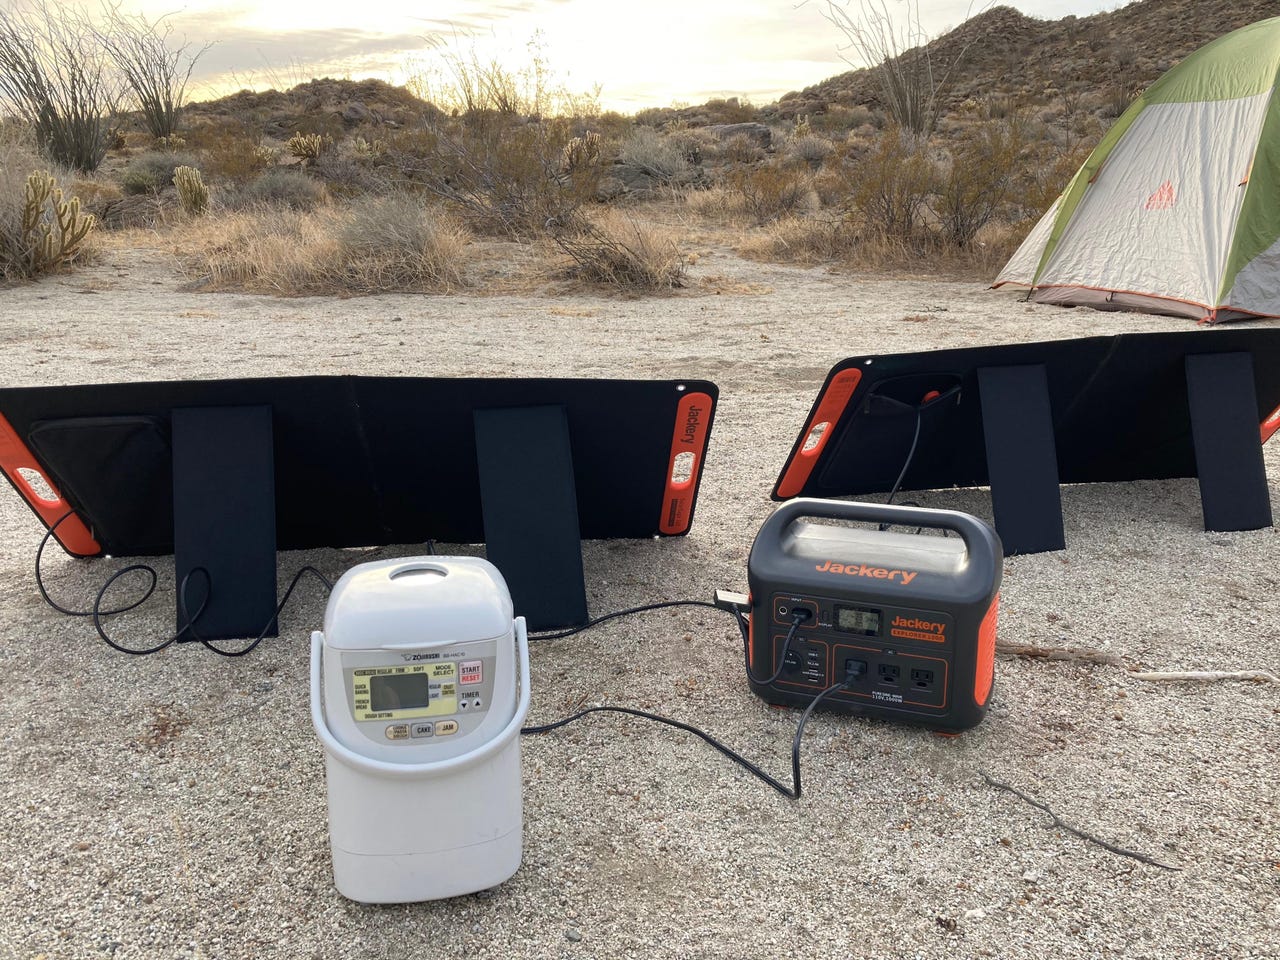 Jackery Solar Generator review: A 1000-watt power station for your